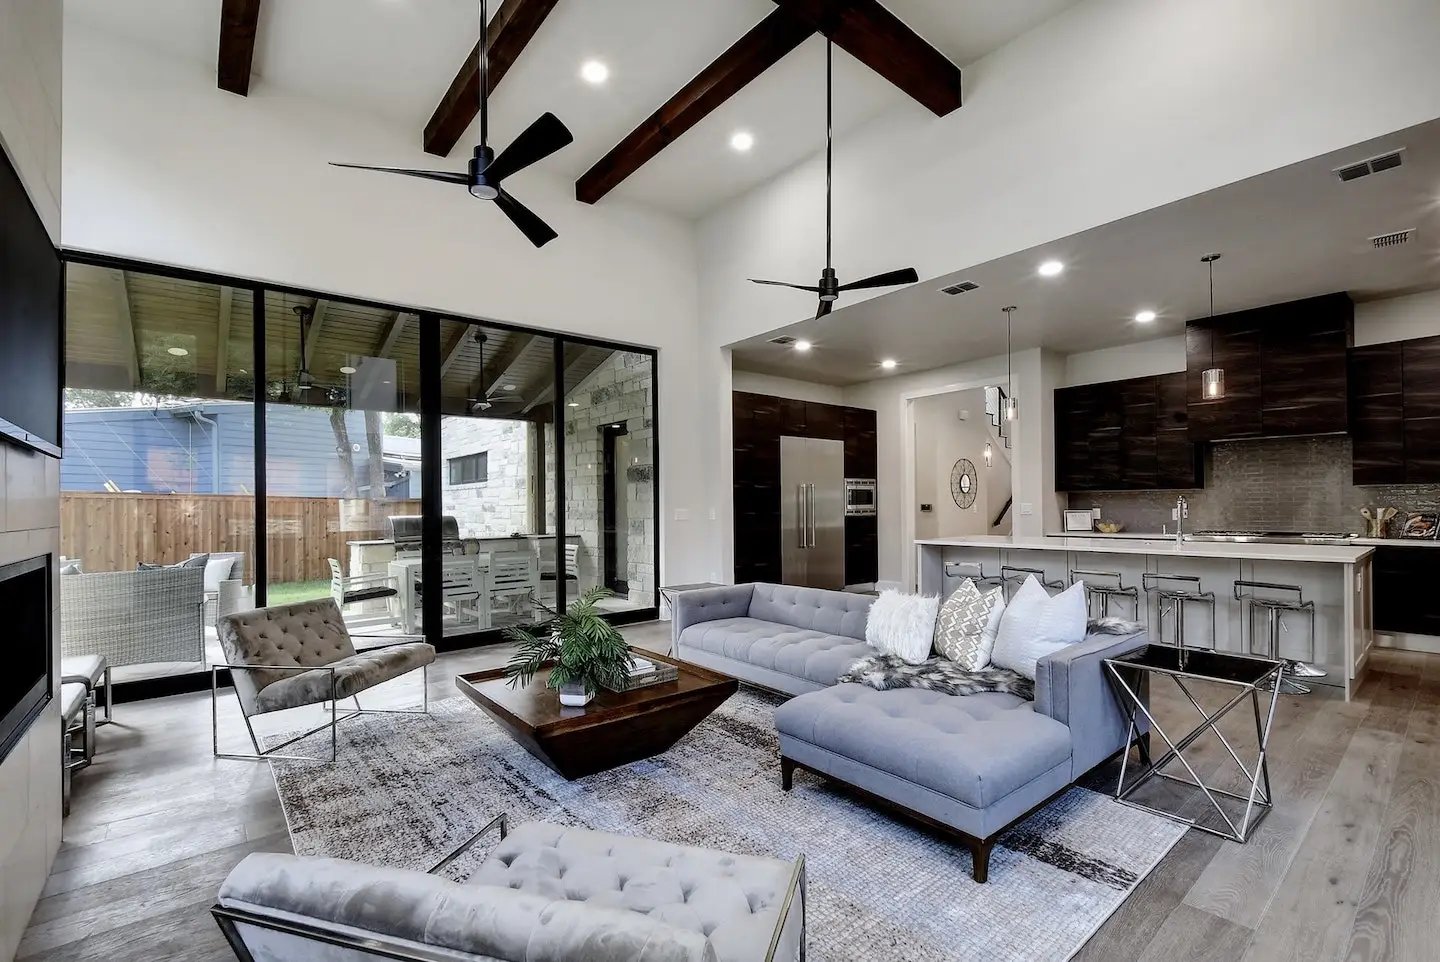 An open, spacious family room that connects to a modern kitchen. In the backdrop, large sliding glass doors look out to the home’s backyard.